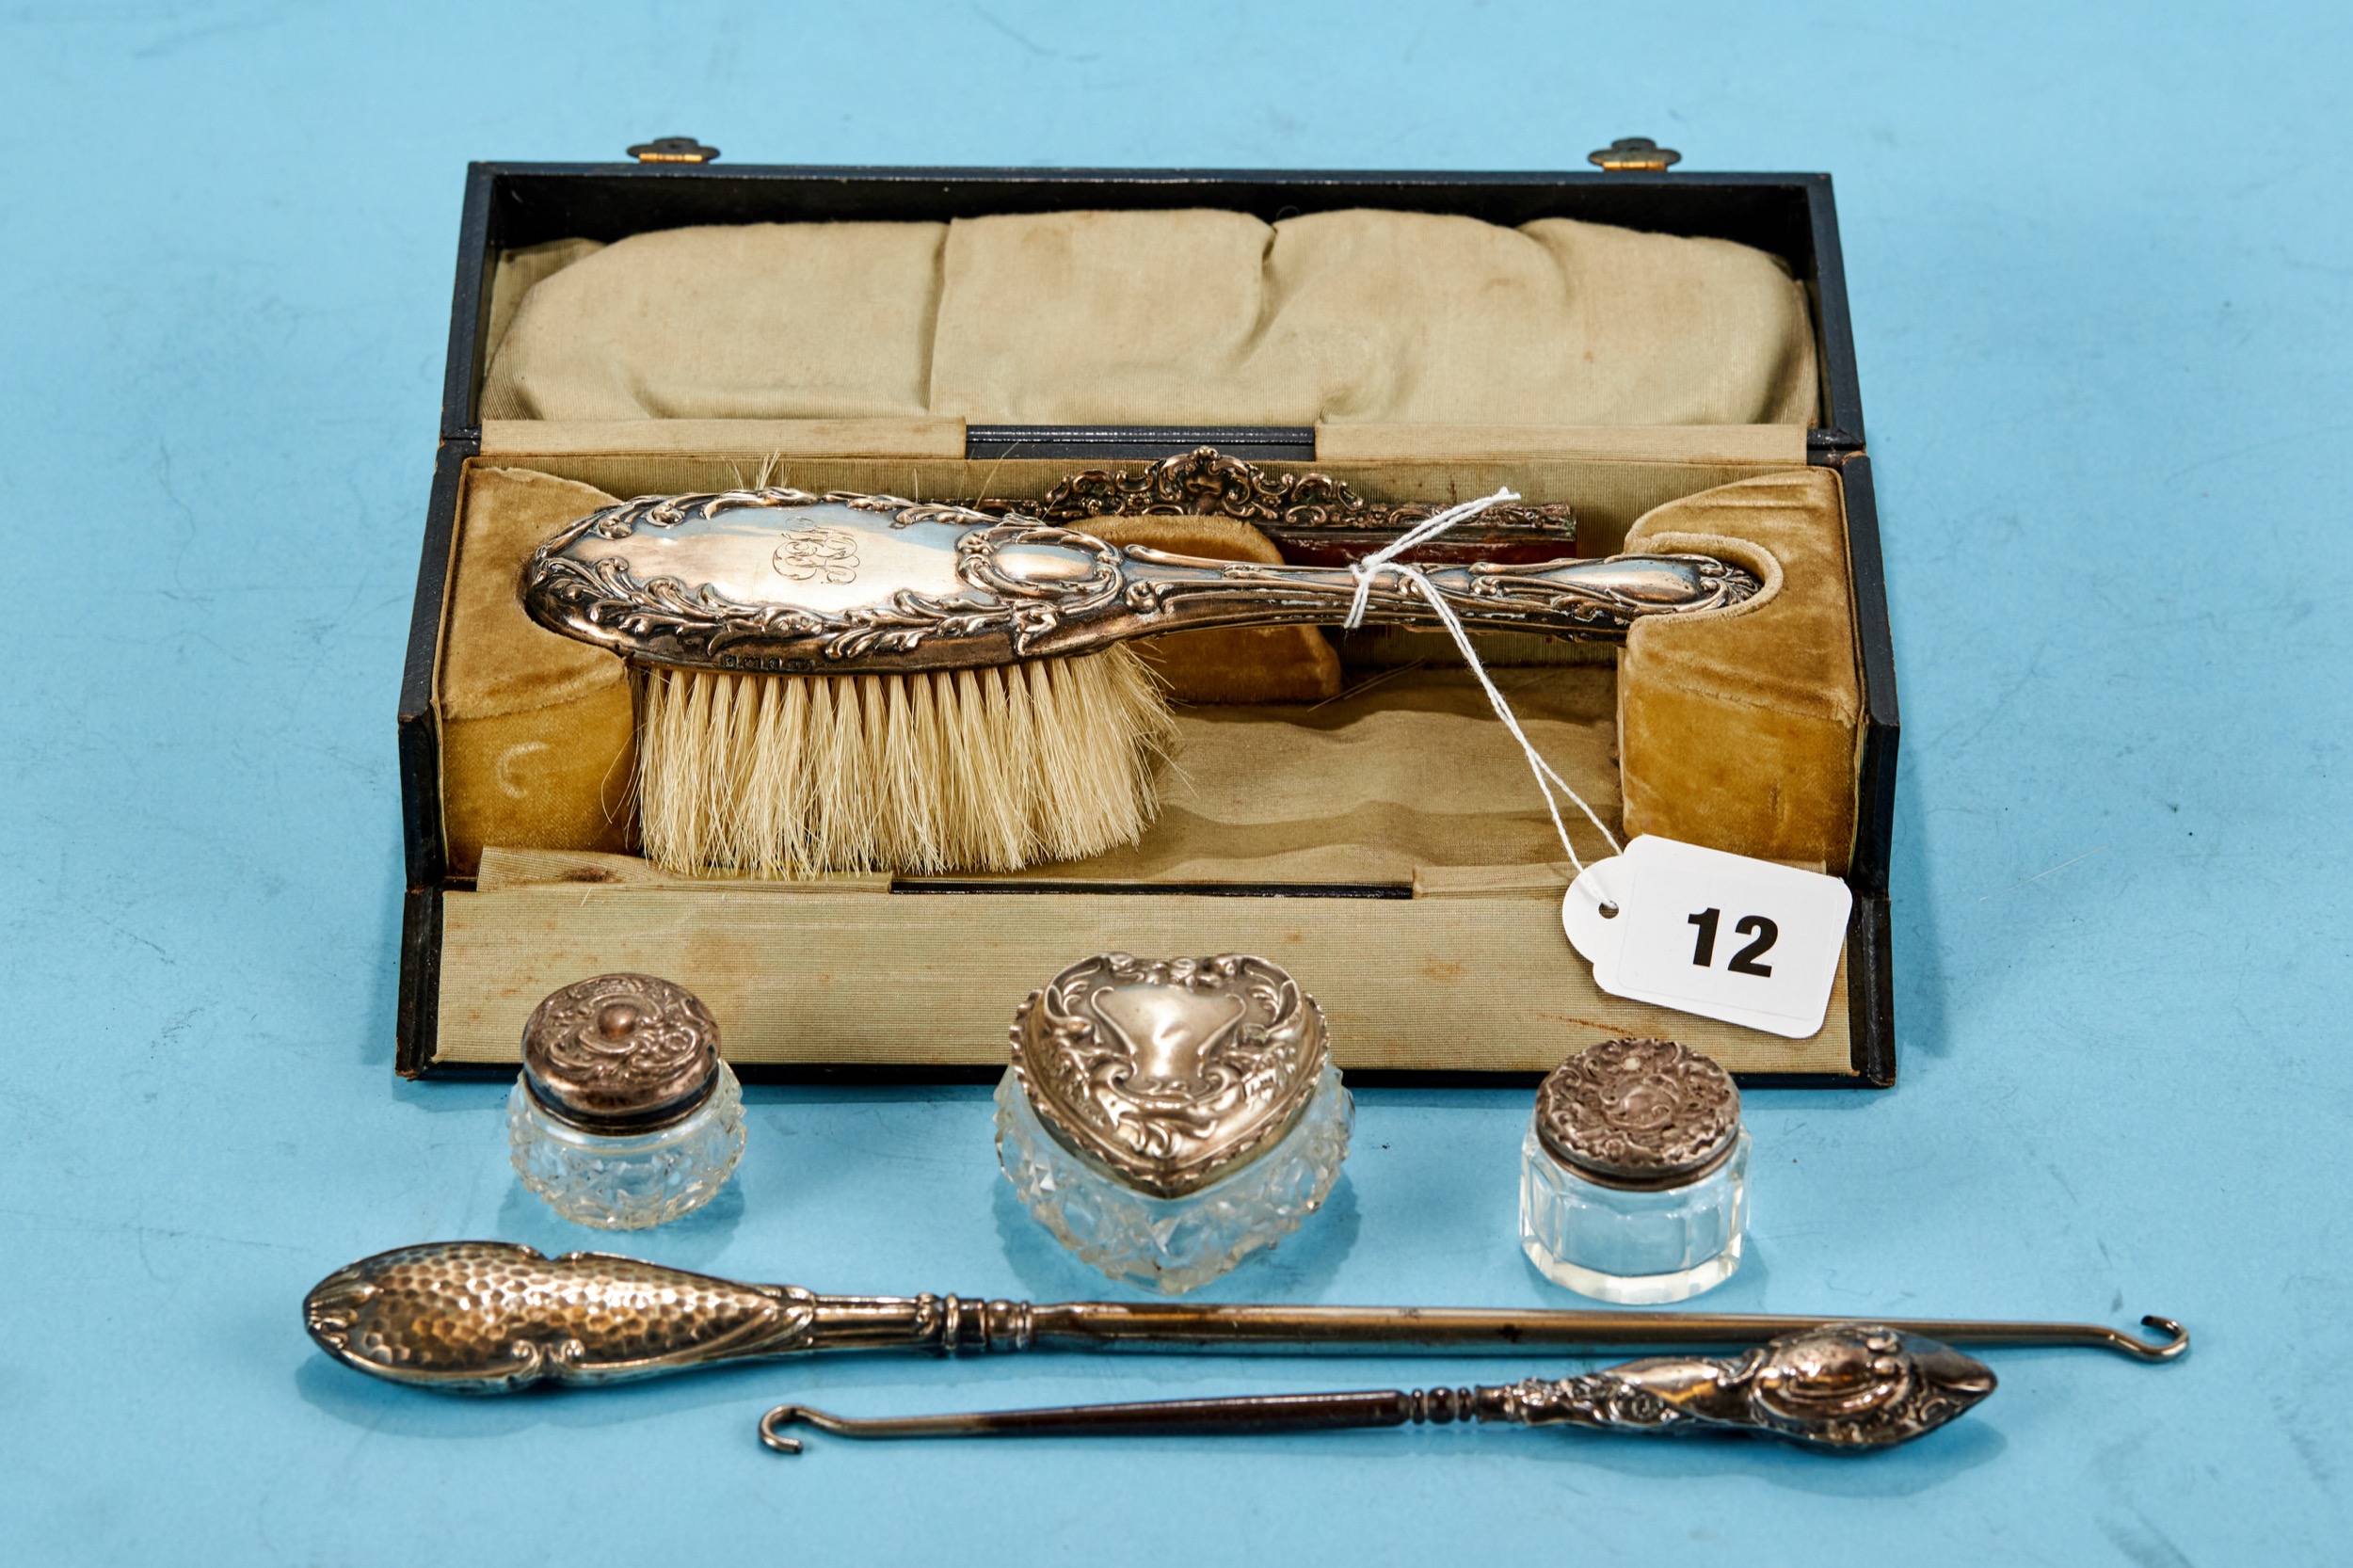 AN EDWARDIAN SILVER HAIR BRUSH AND COMB SET with embossed decoration maker: L&S, Birmingham 1905